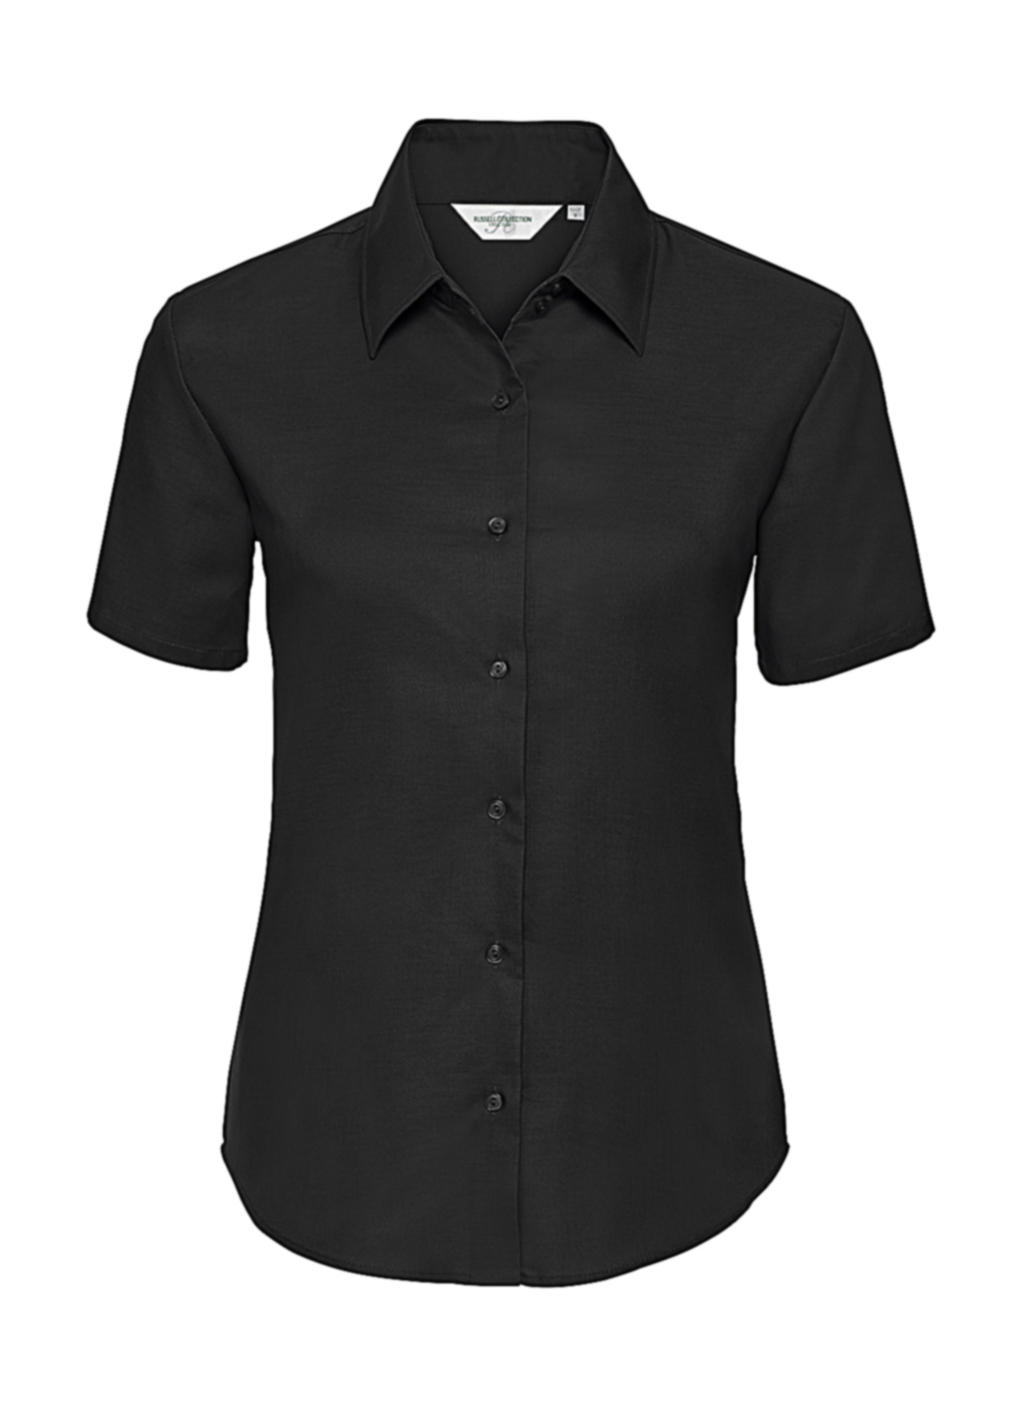  Ladies Classic Oxford Shirt in Farbe Black